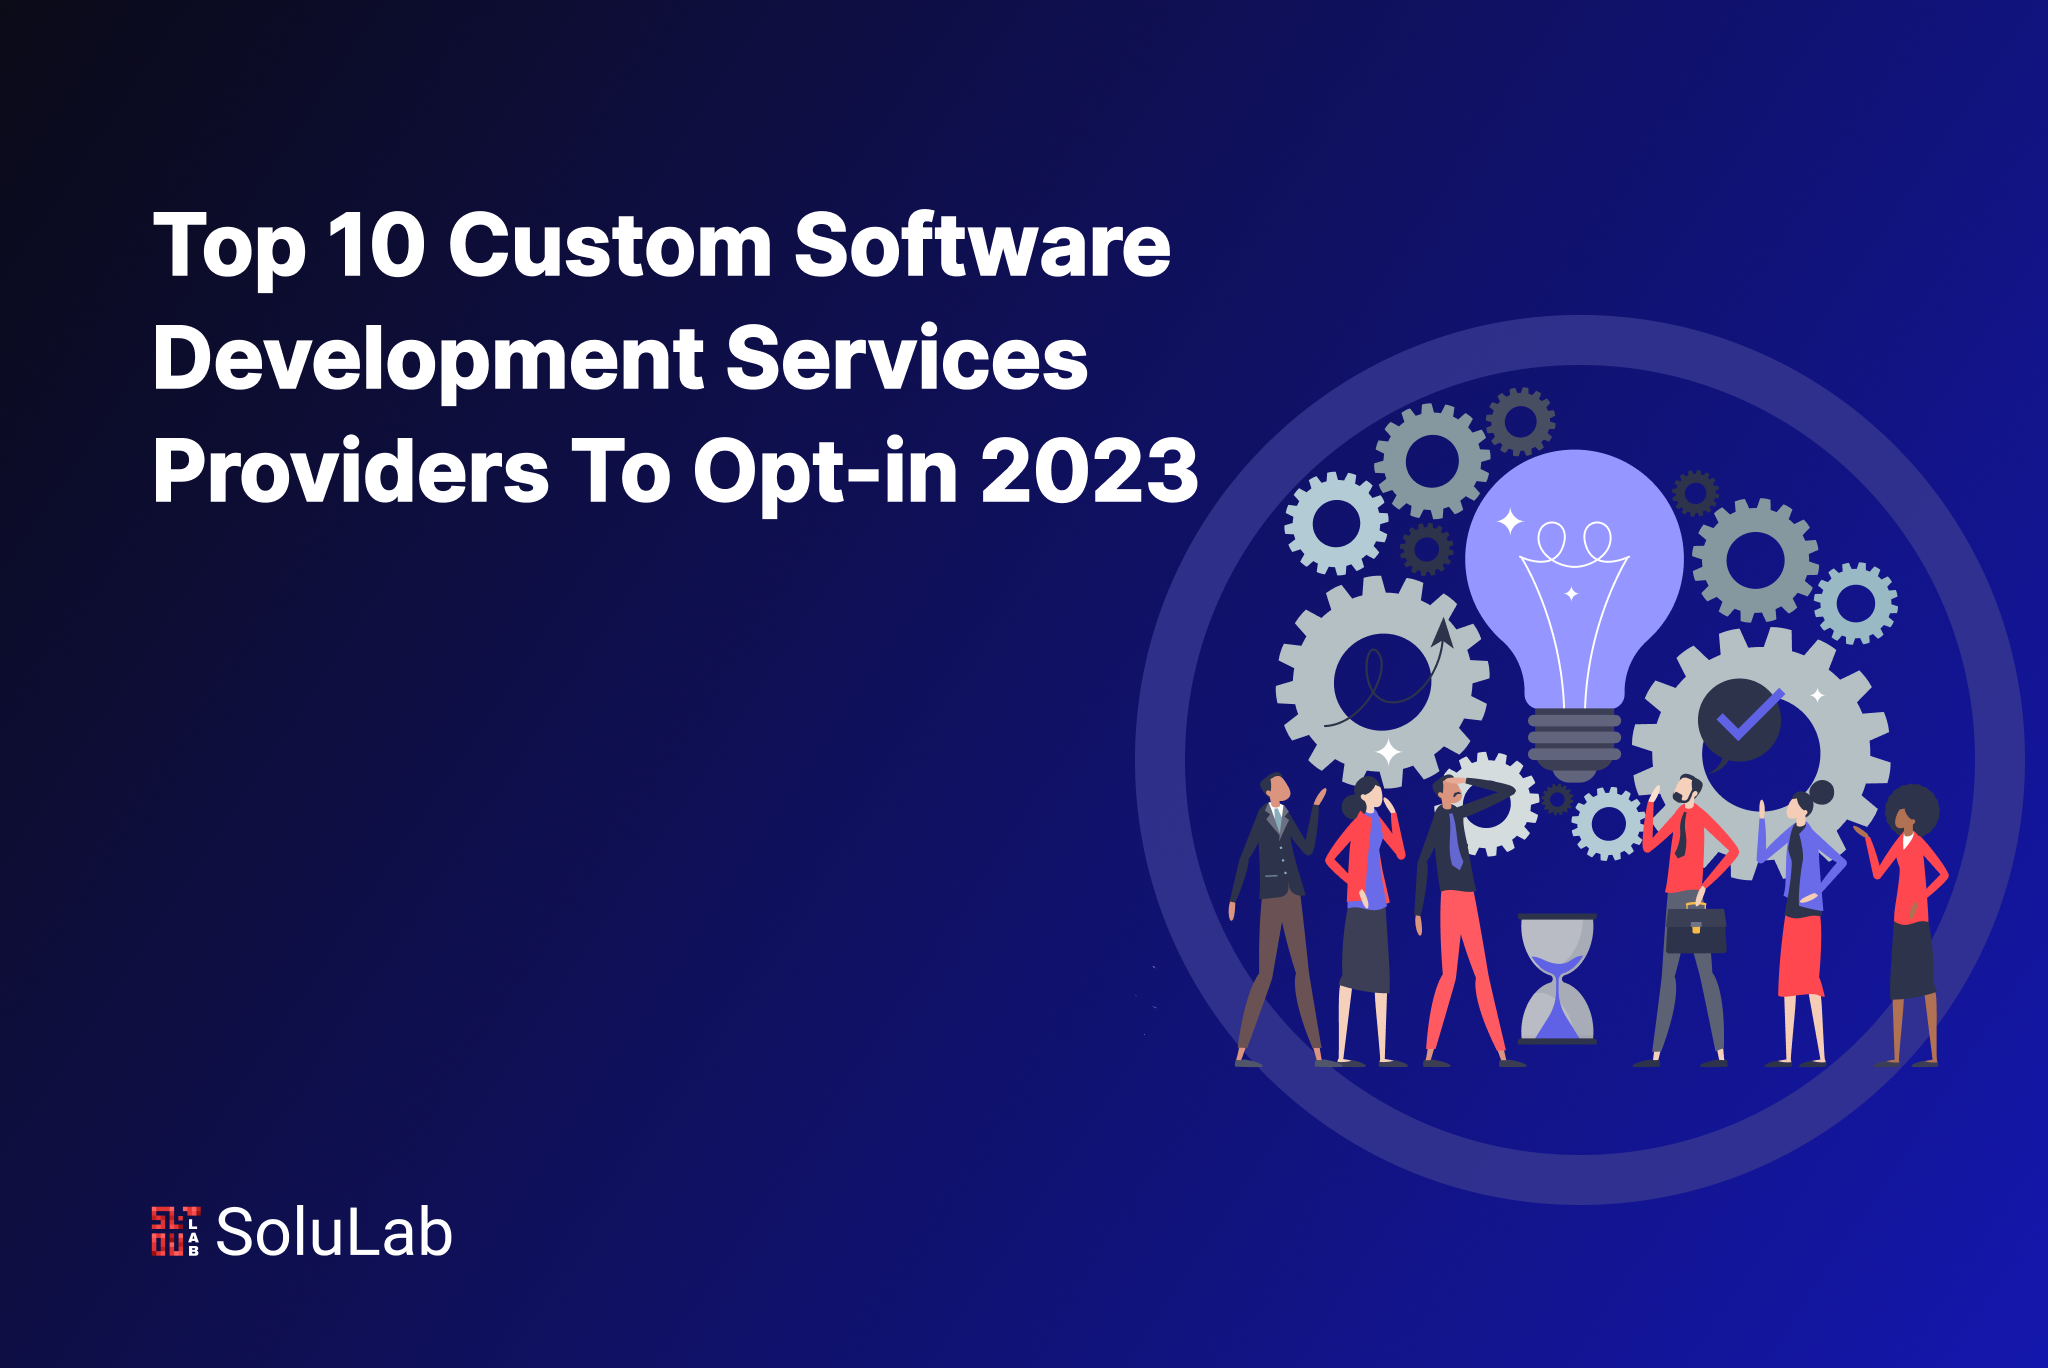 Top 10 Custom Software Development Services Providers To Opt-in 2023